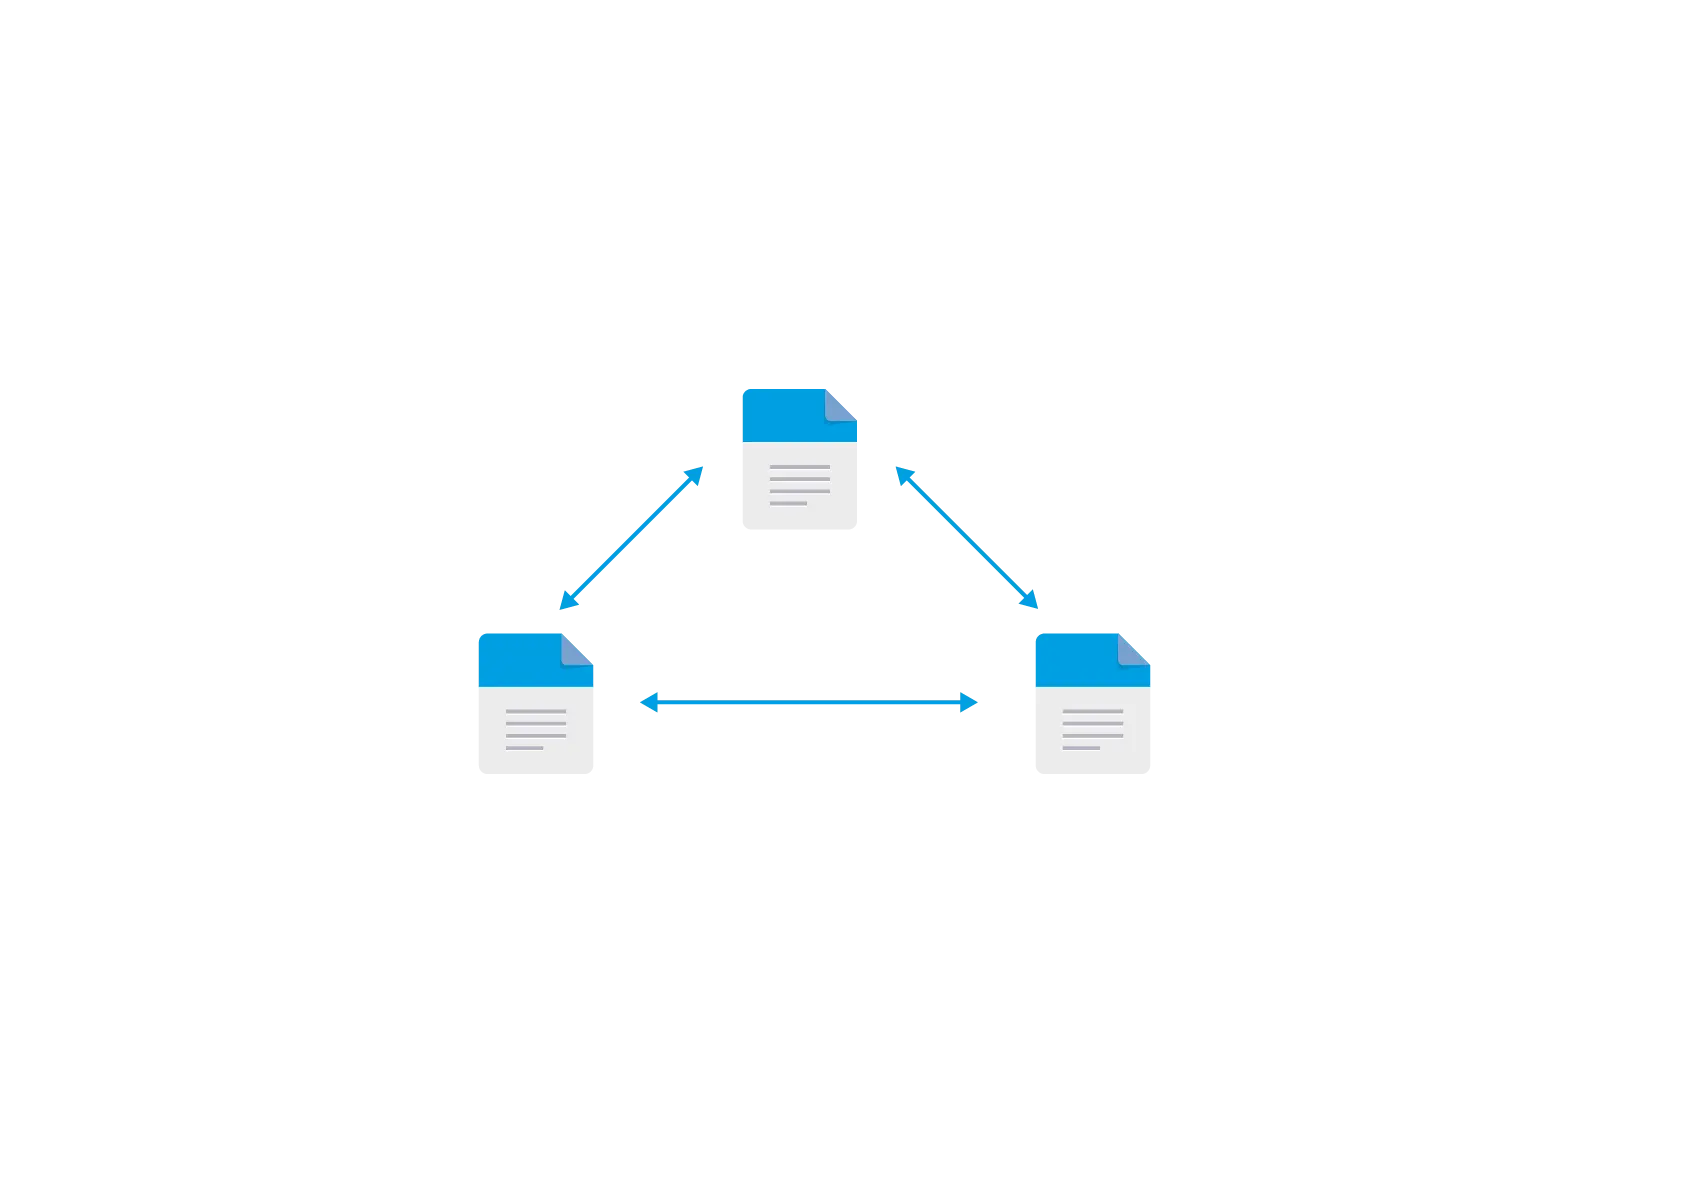 Multi directional and multi way file sync and replication